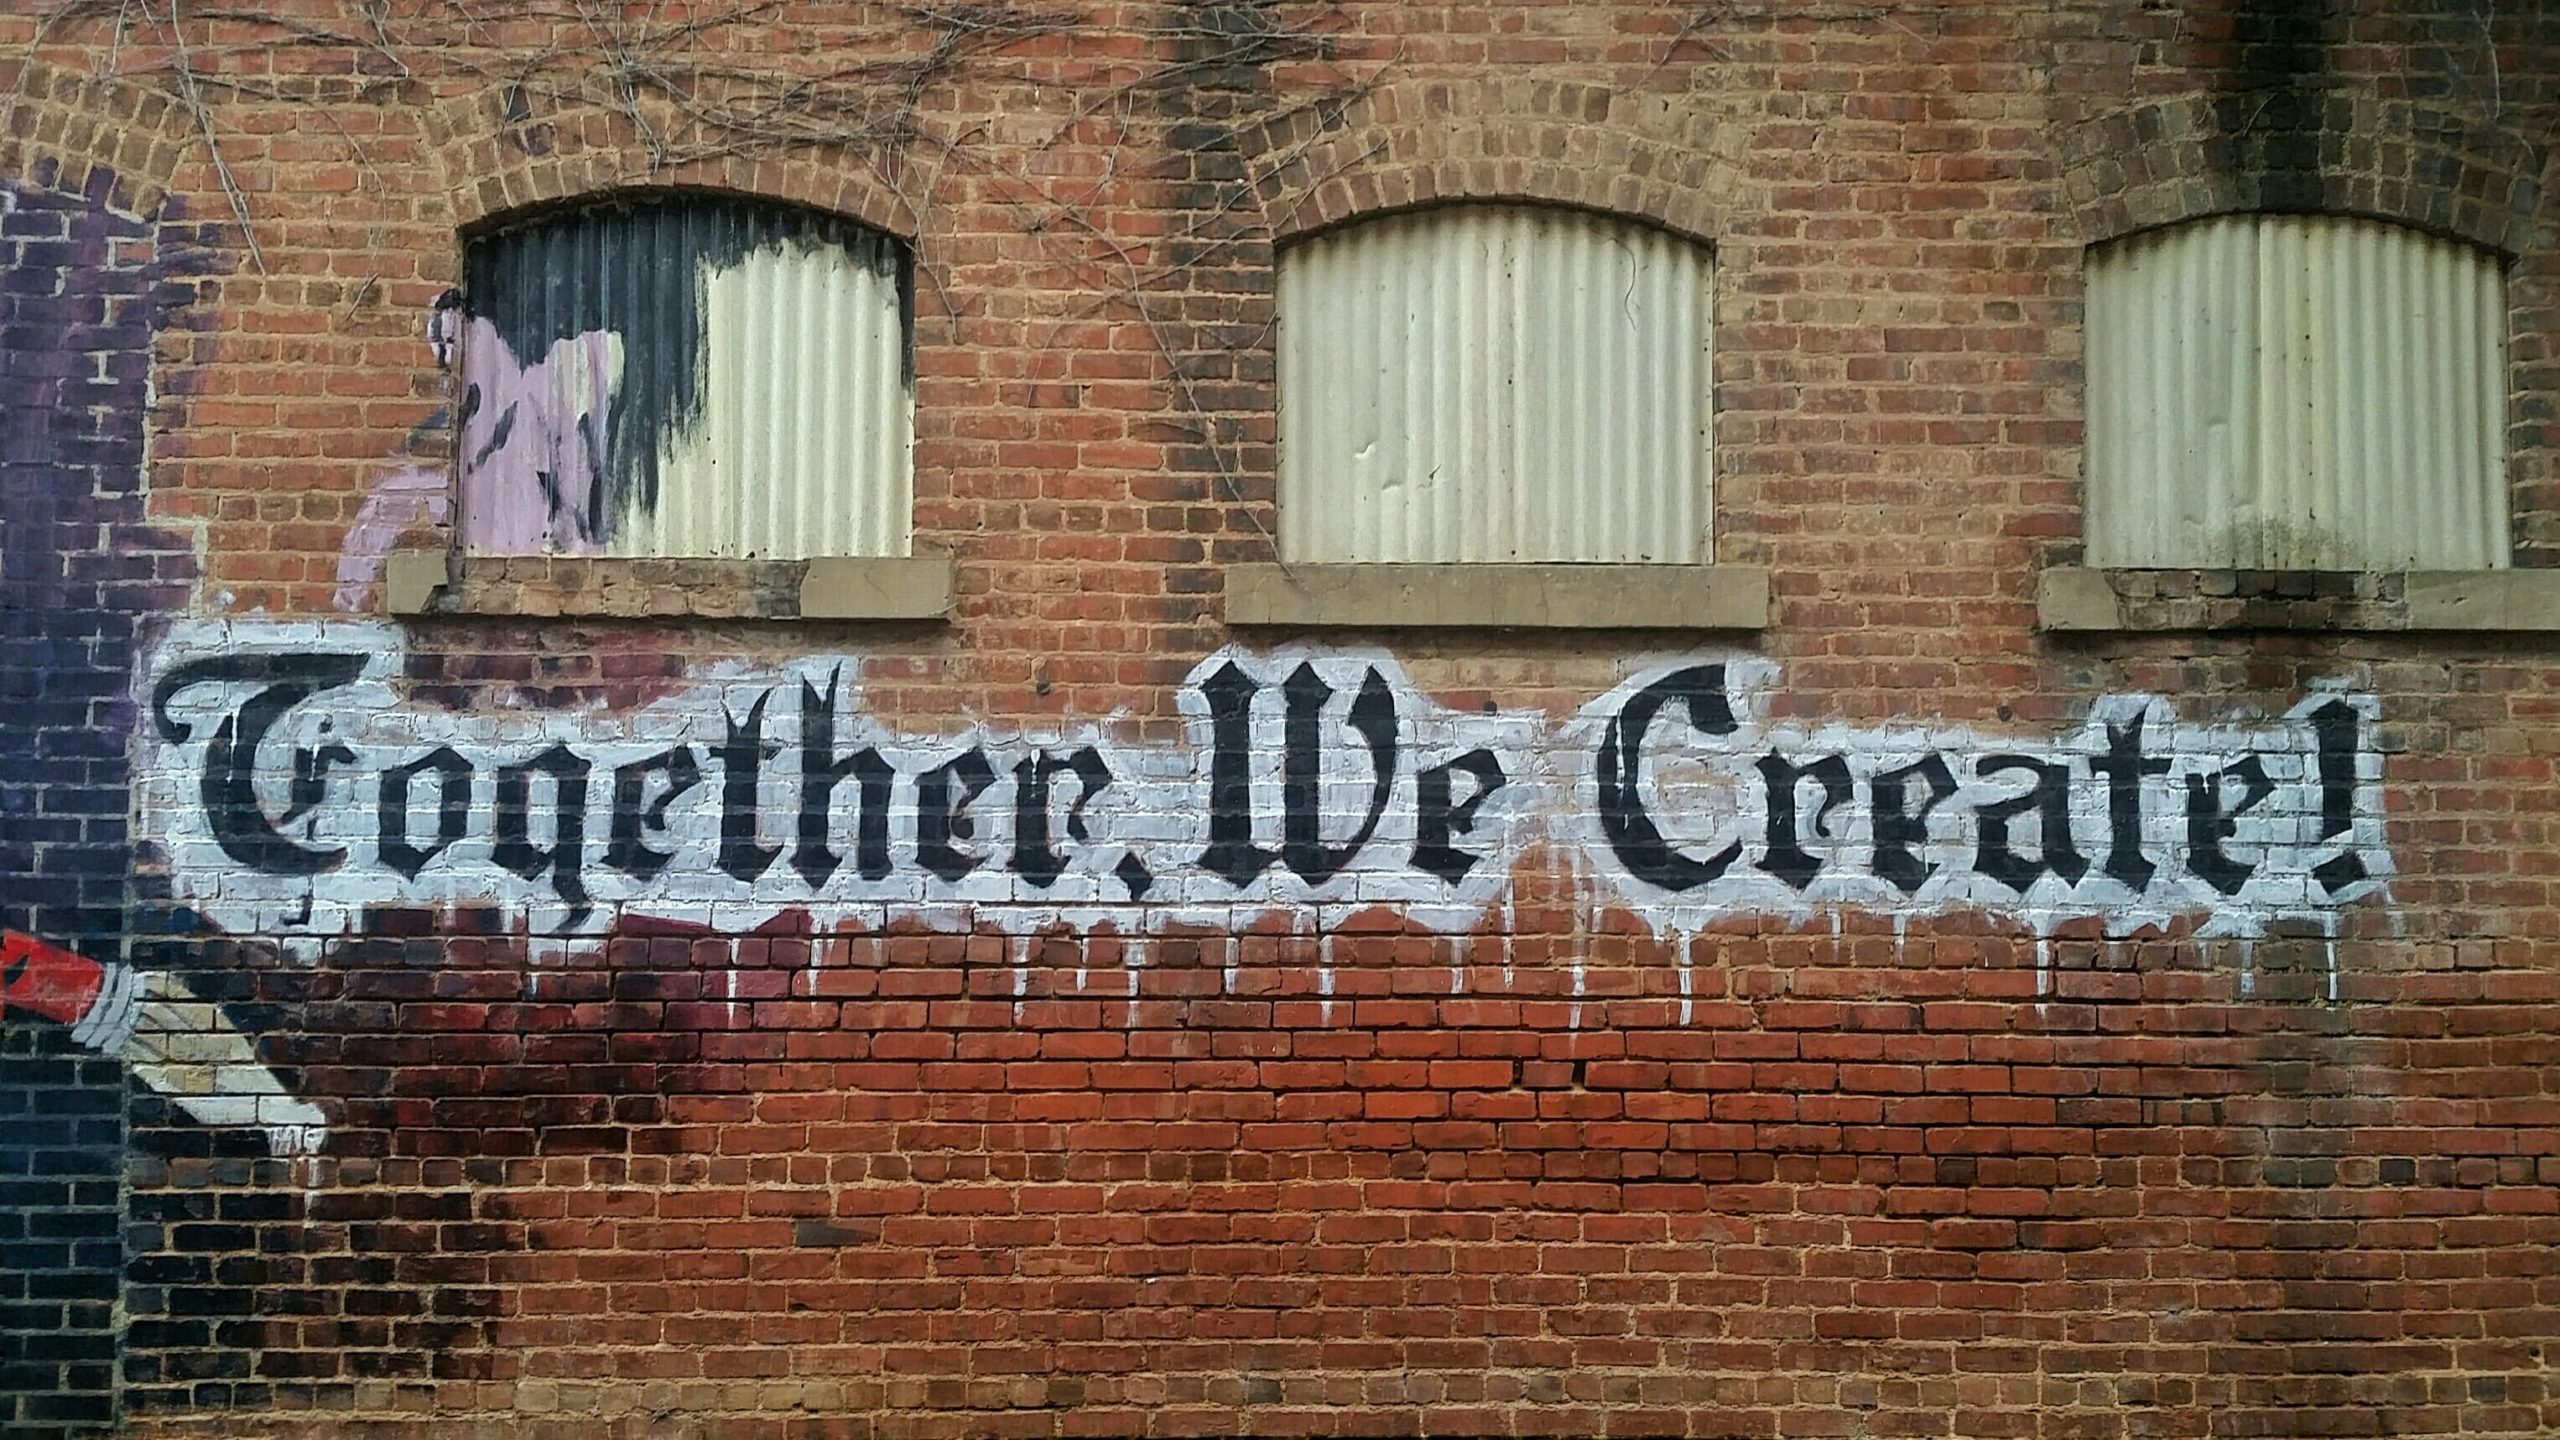 mural on building that says together we create